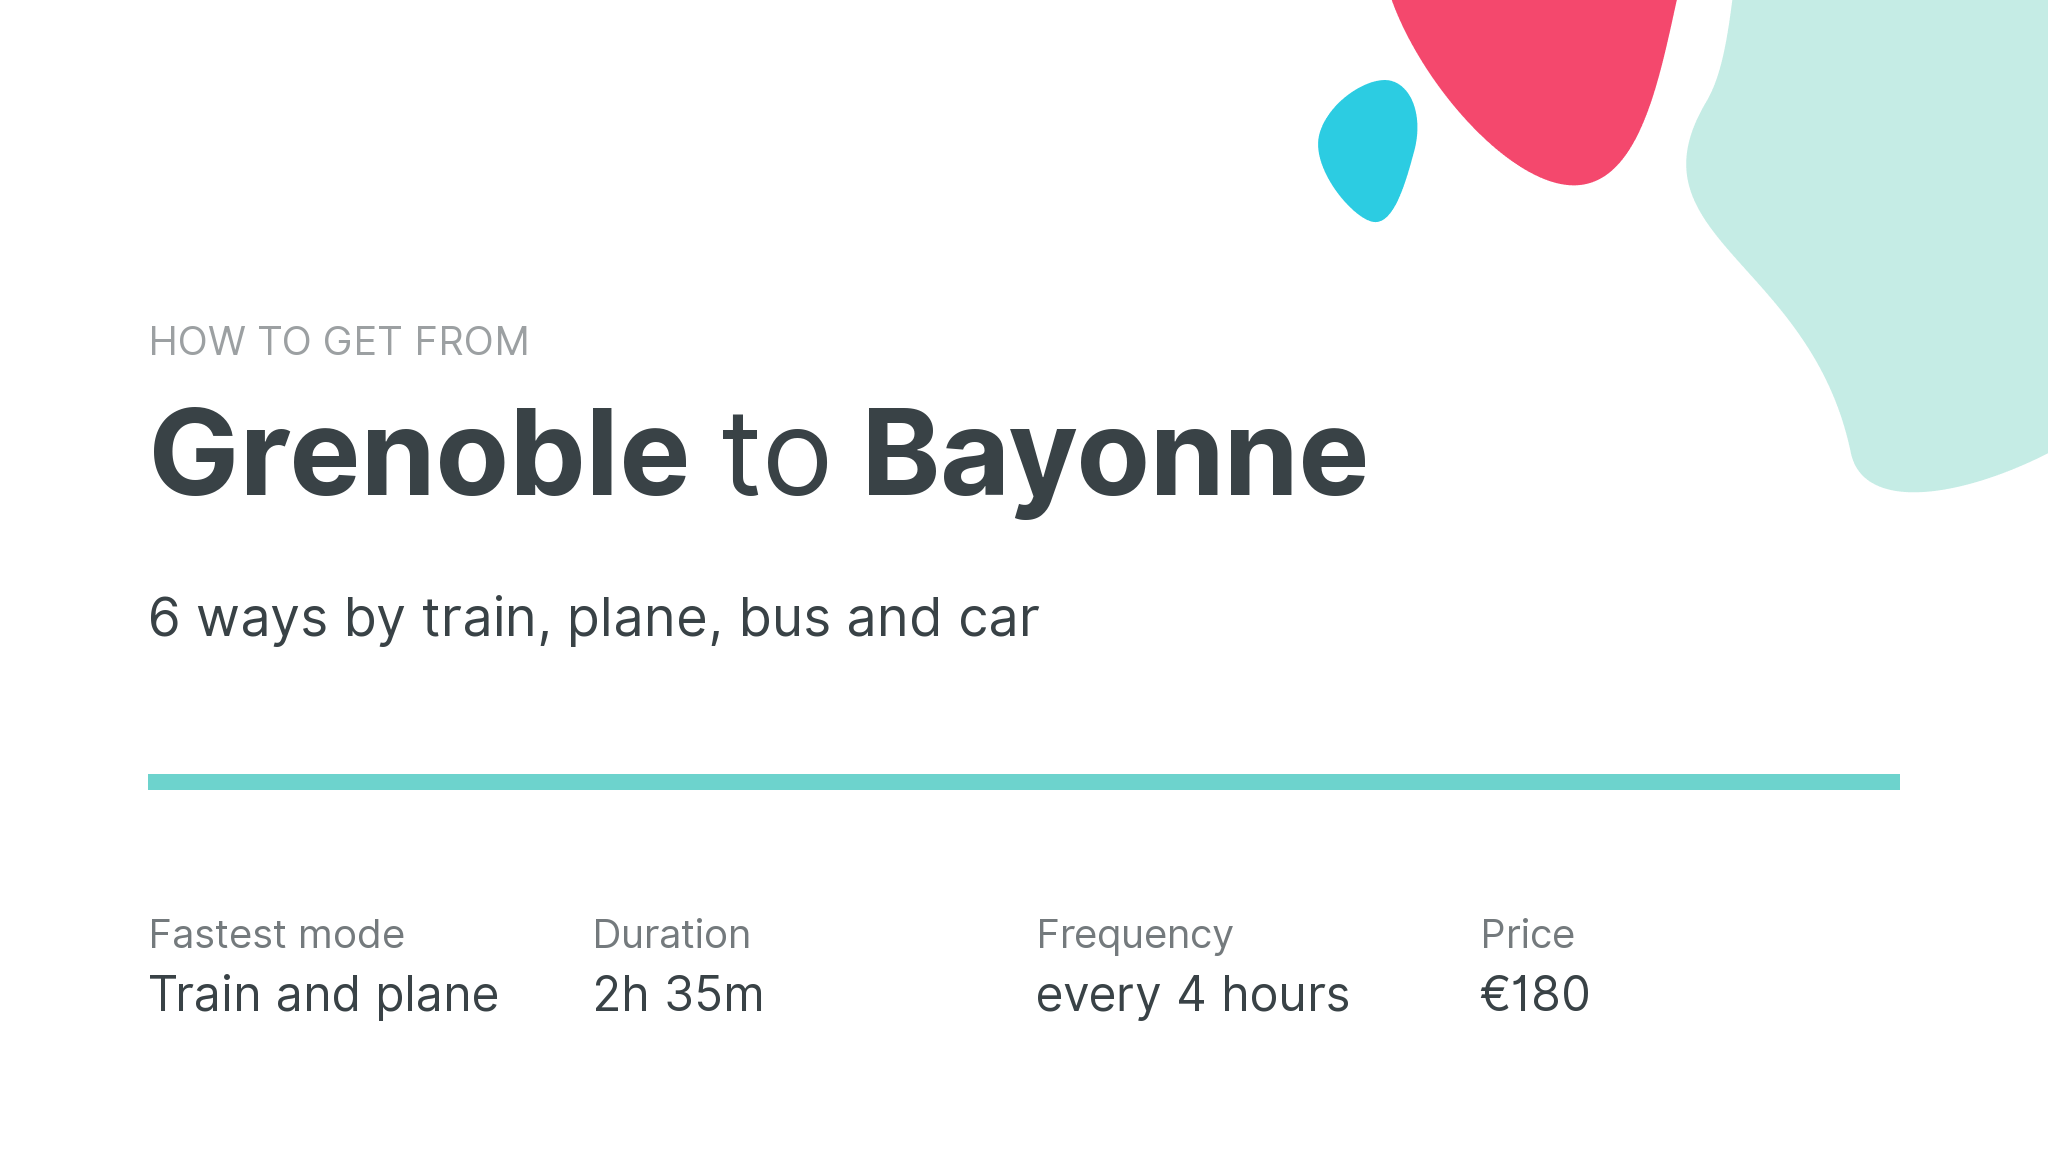 How do I get from Grenoble to Bayonne